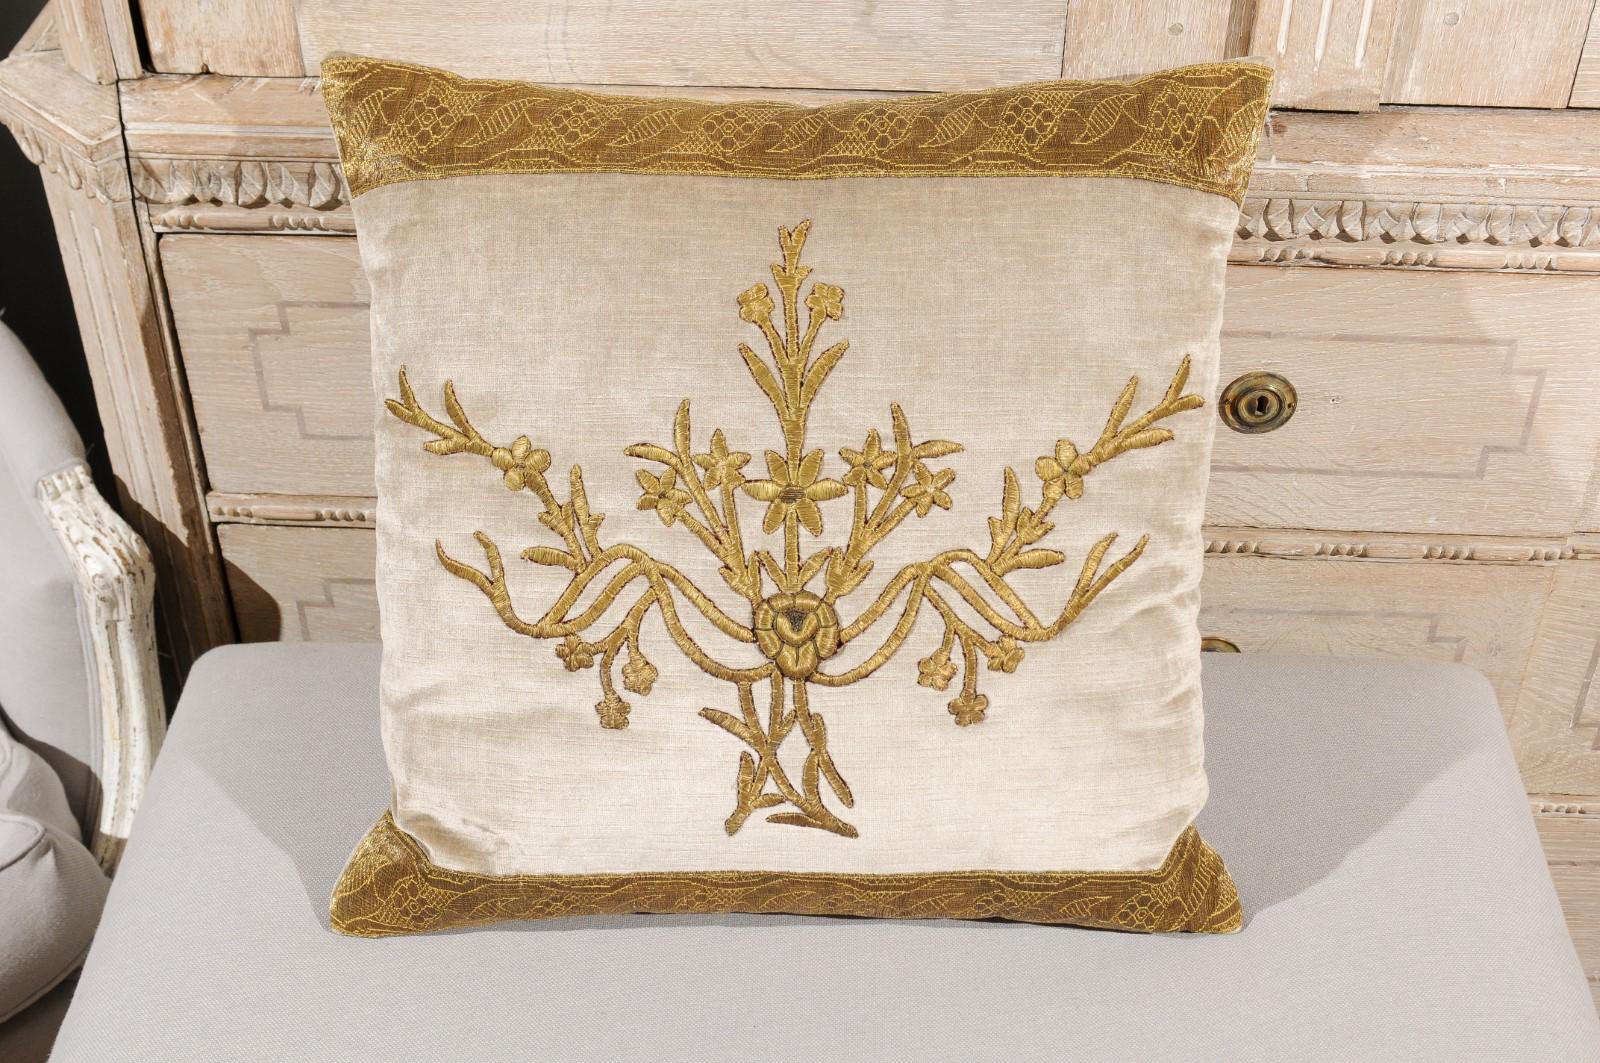 A pair of antique ottoman Empire raised gold metallic embroidery on silver velvet Bohça, made into down-filled pillows. Taken from a distressed Bohça (deriving from the Arabic word for package, a Bohça is a large square piece of cloth used to wrap